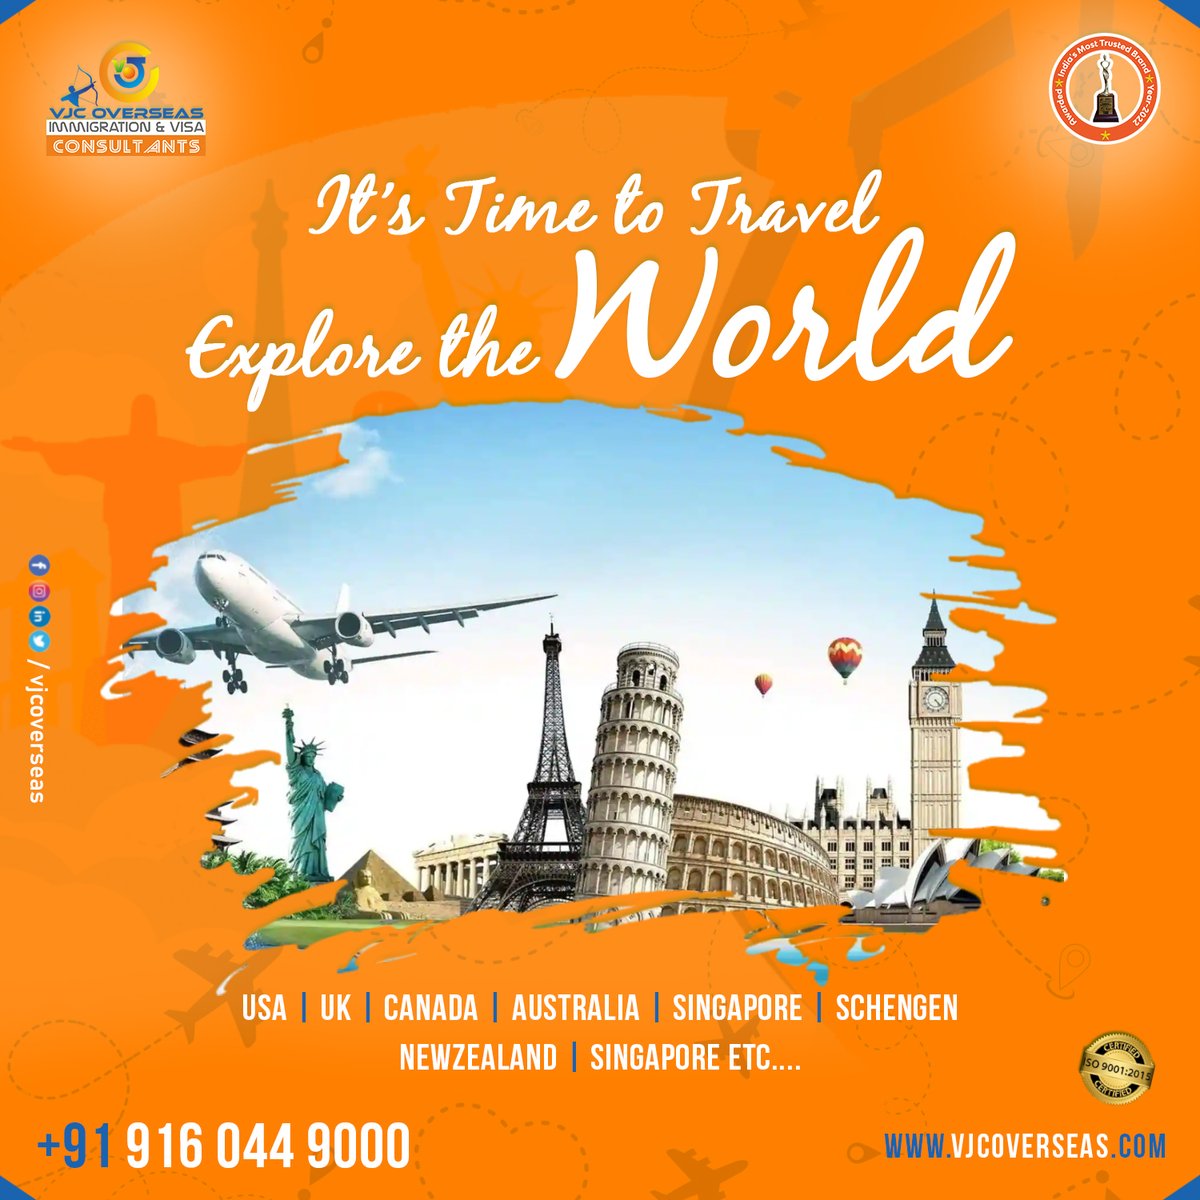 More than a million Indians travel to the #UK, #Europe, #Australia, #Canada, #New Zealand, and #Singapore each year to partake in the country numerous recreational opportunities.

Mobile: +91 9160449000
visit us: vjcoverseas.com

#usavisitvisa #usatour #ukvisitvisa #world